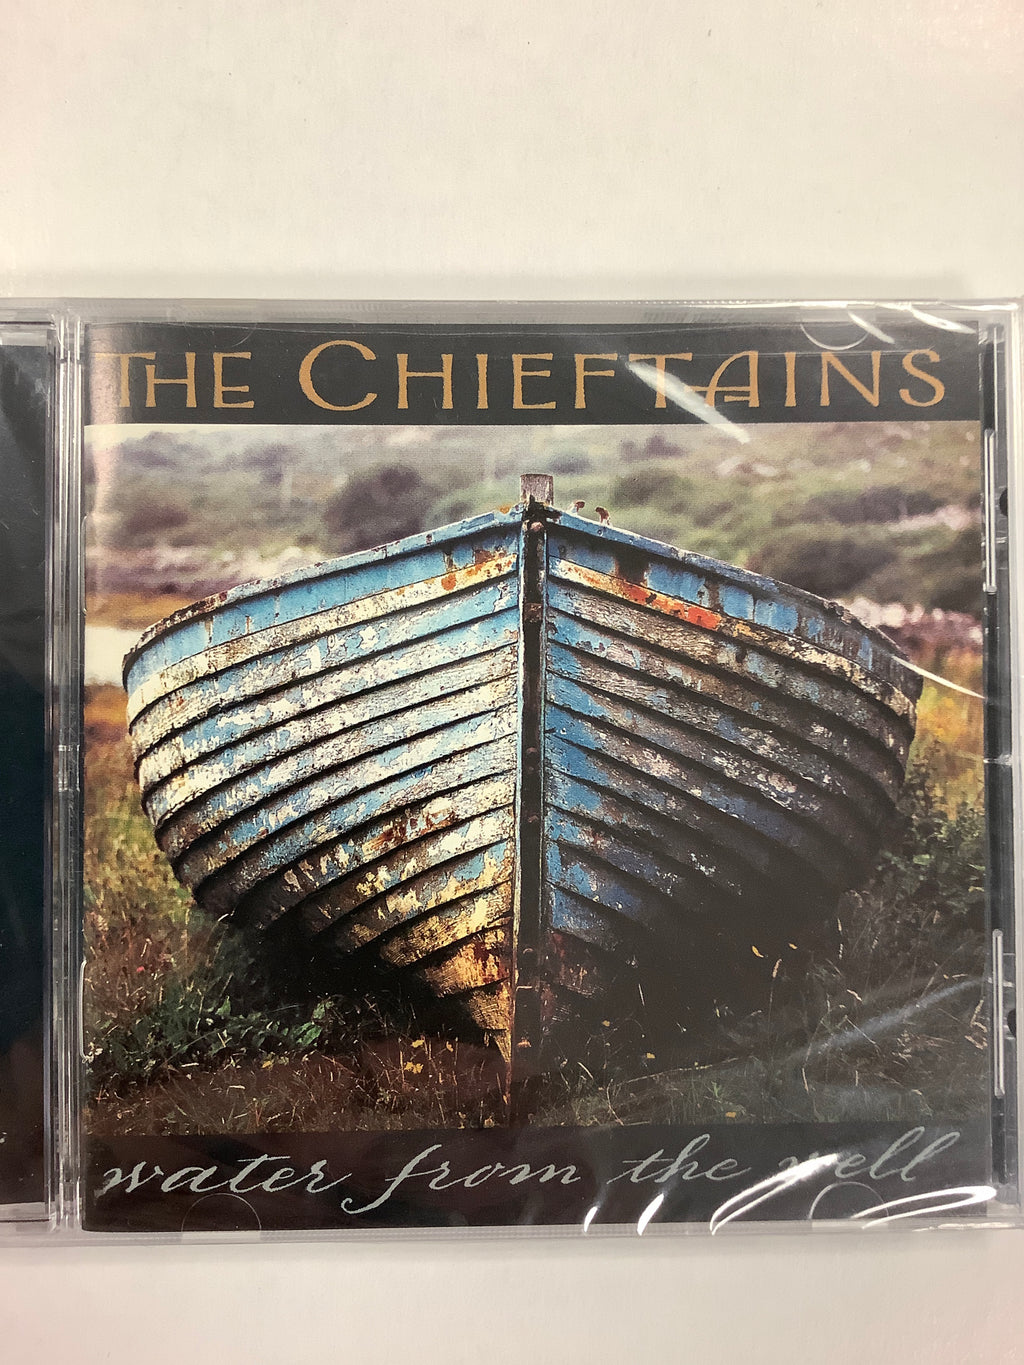 The chieftains water from the well cd